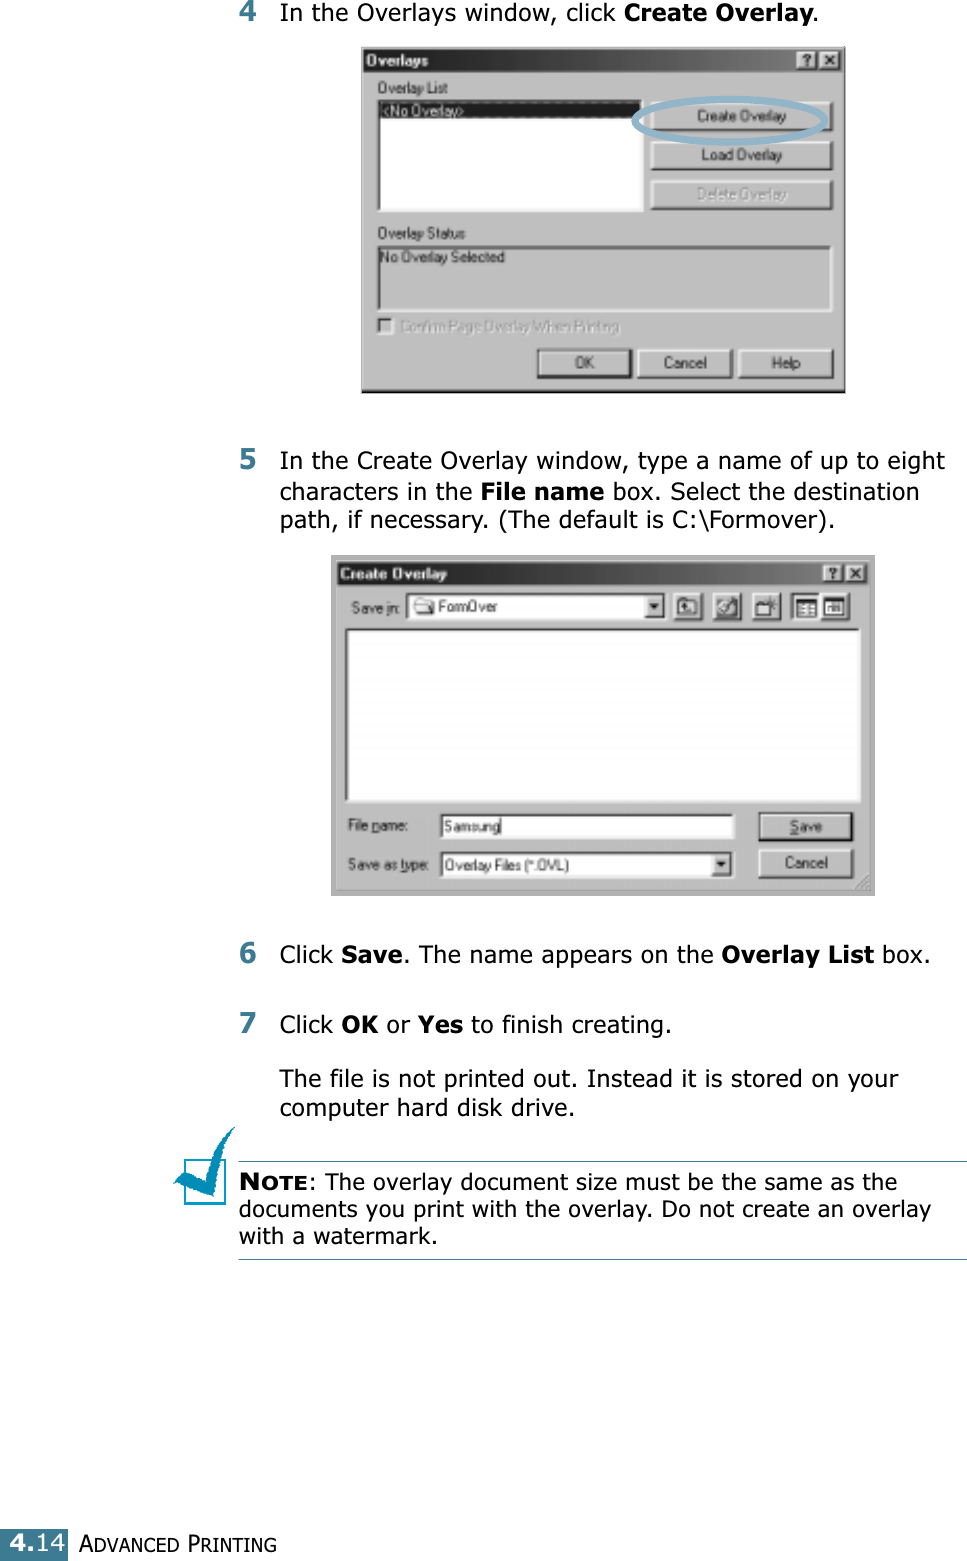 ADVANCED PRINTING4.144In the Overlays window, click Create Overlay. 5In the Create Overlay window, type a name of up to eight characters in the File name box. Select the destination path, if necessary. (The default is C:\Formover).6Click Save. The name appears on the Overlay List box. 7Click OK or Yes to finish creating. The file is not printed out. Instead it is stored on your computer hard disk drive. NOTE: The overlay document size must be the same as the documents you print with the overlay. Do not create an overlay with a watermark. 